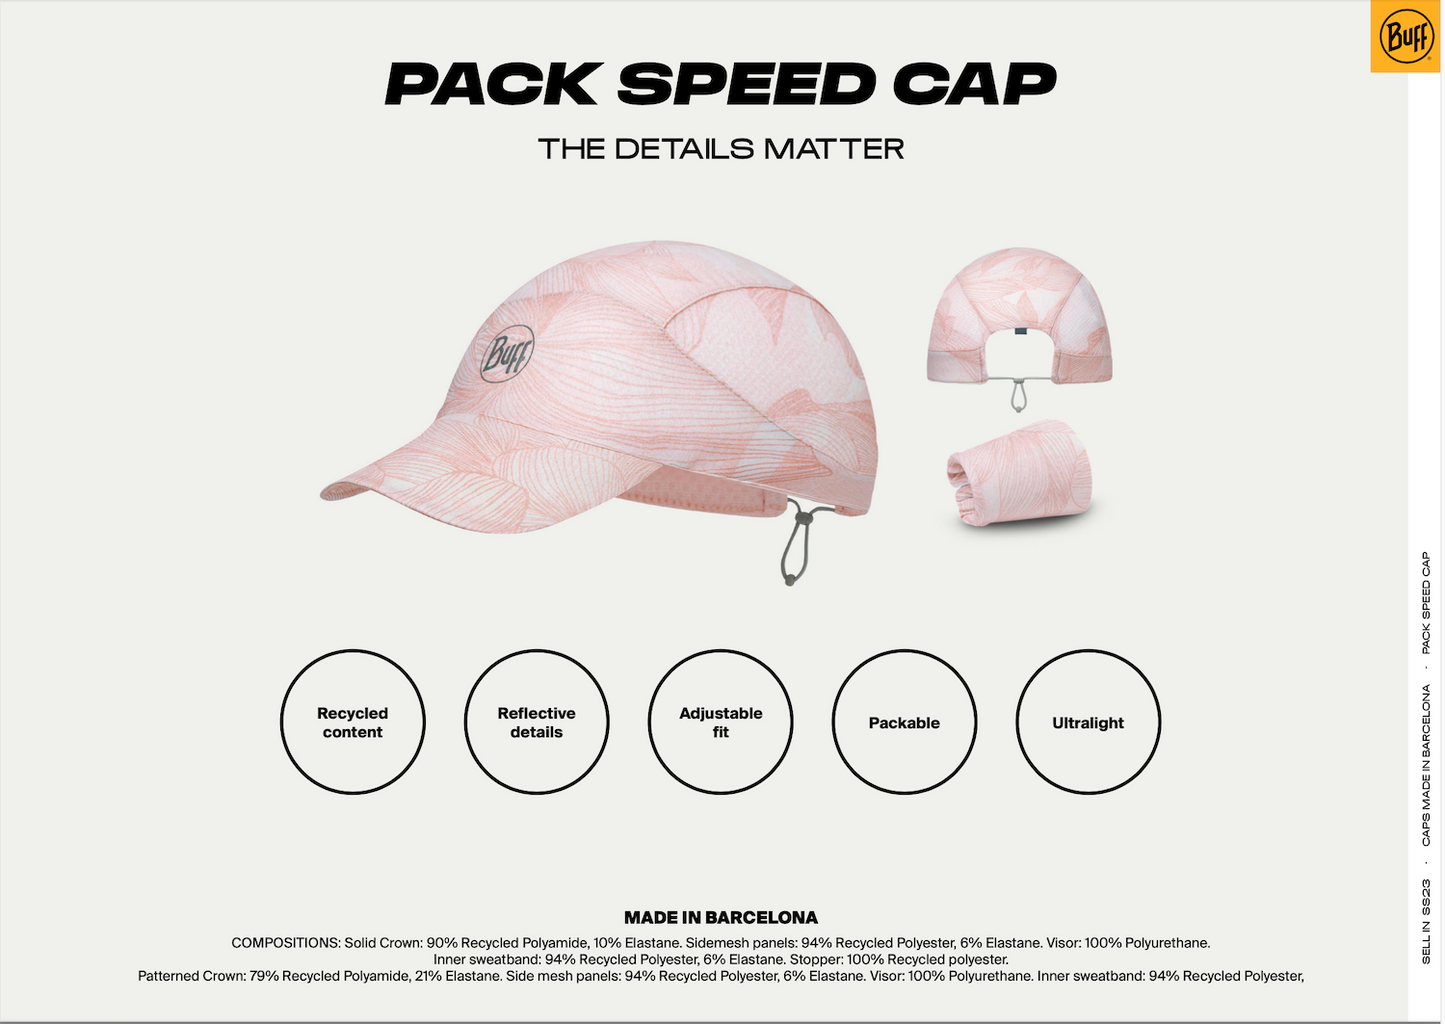 Pack Speed Features